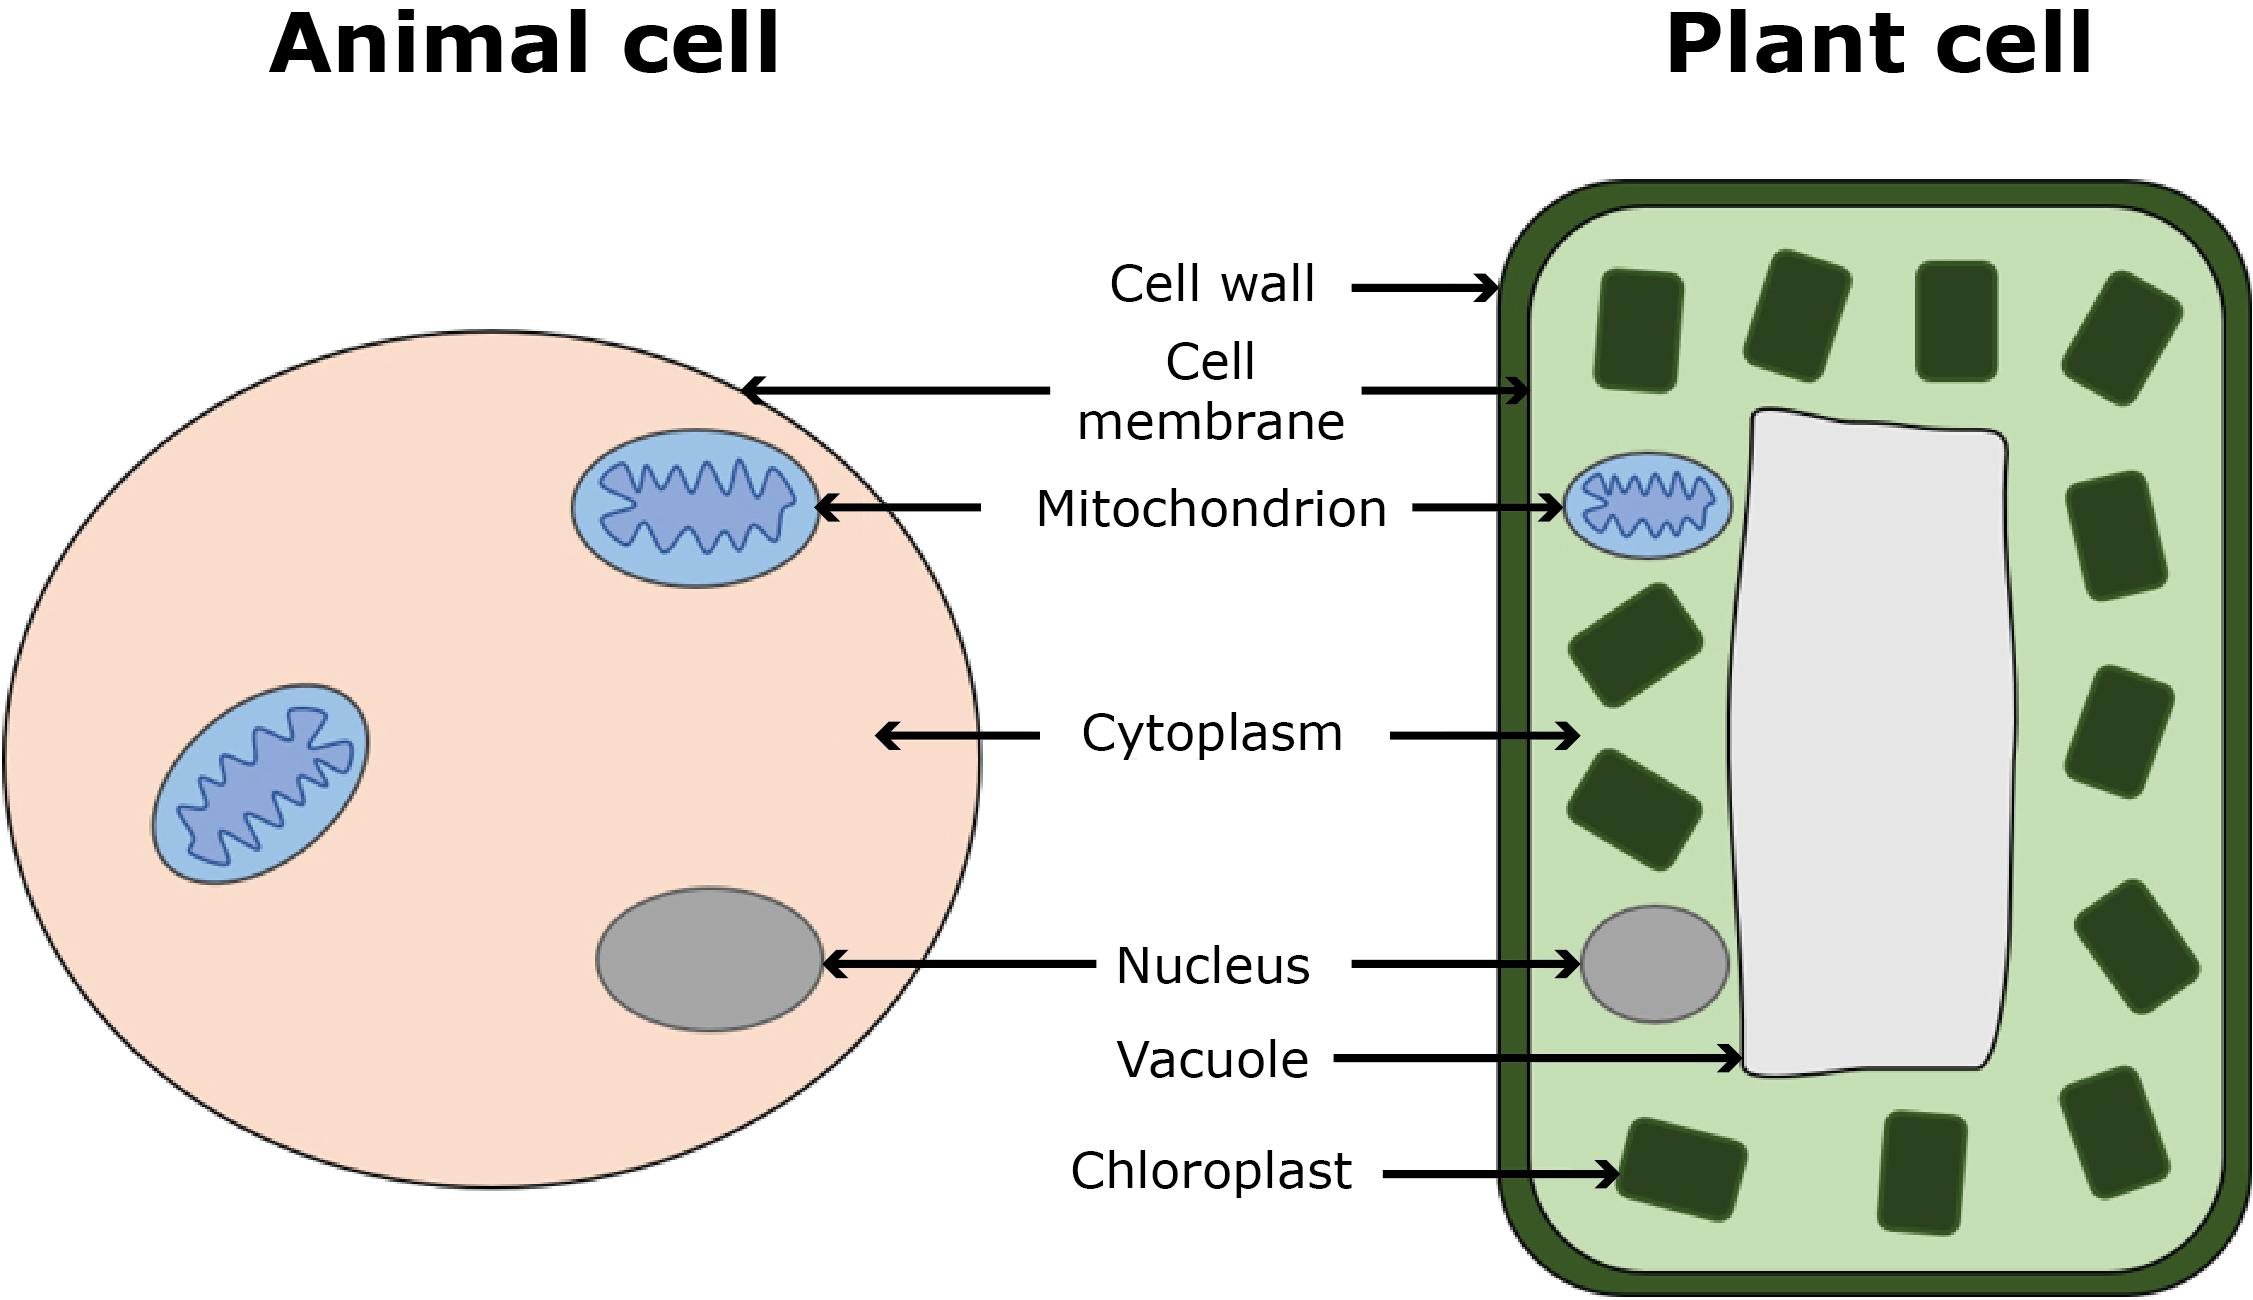 Animal cells and plant cells